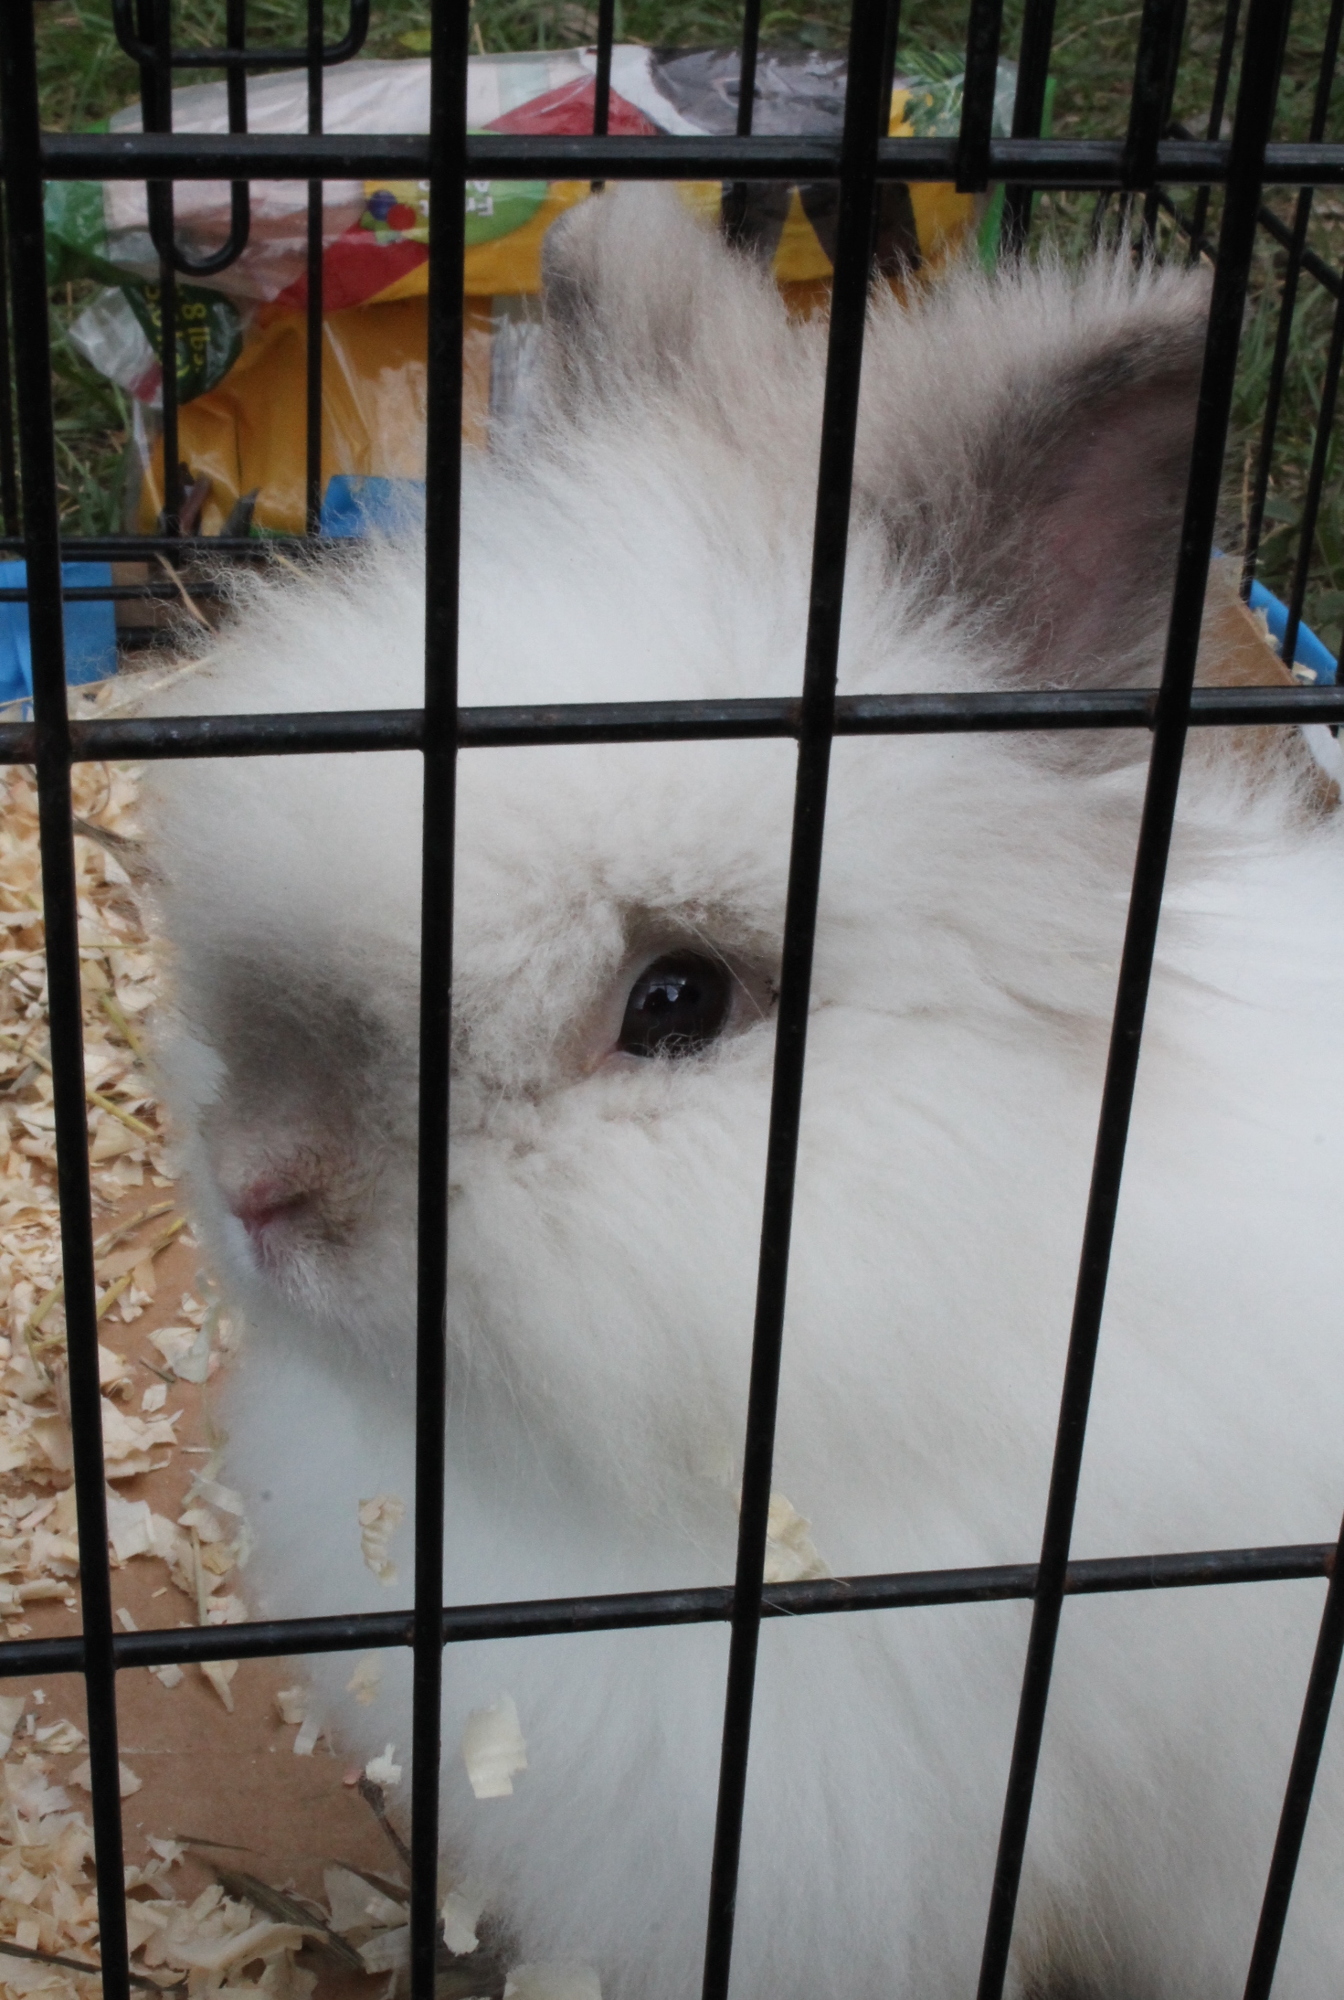 The rescue will take in nearly any animal, including rabbits.